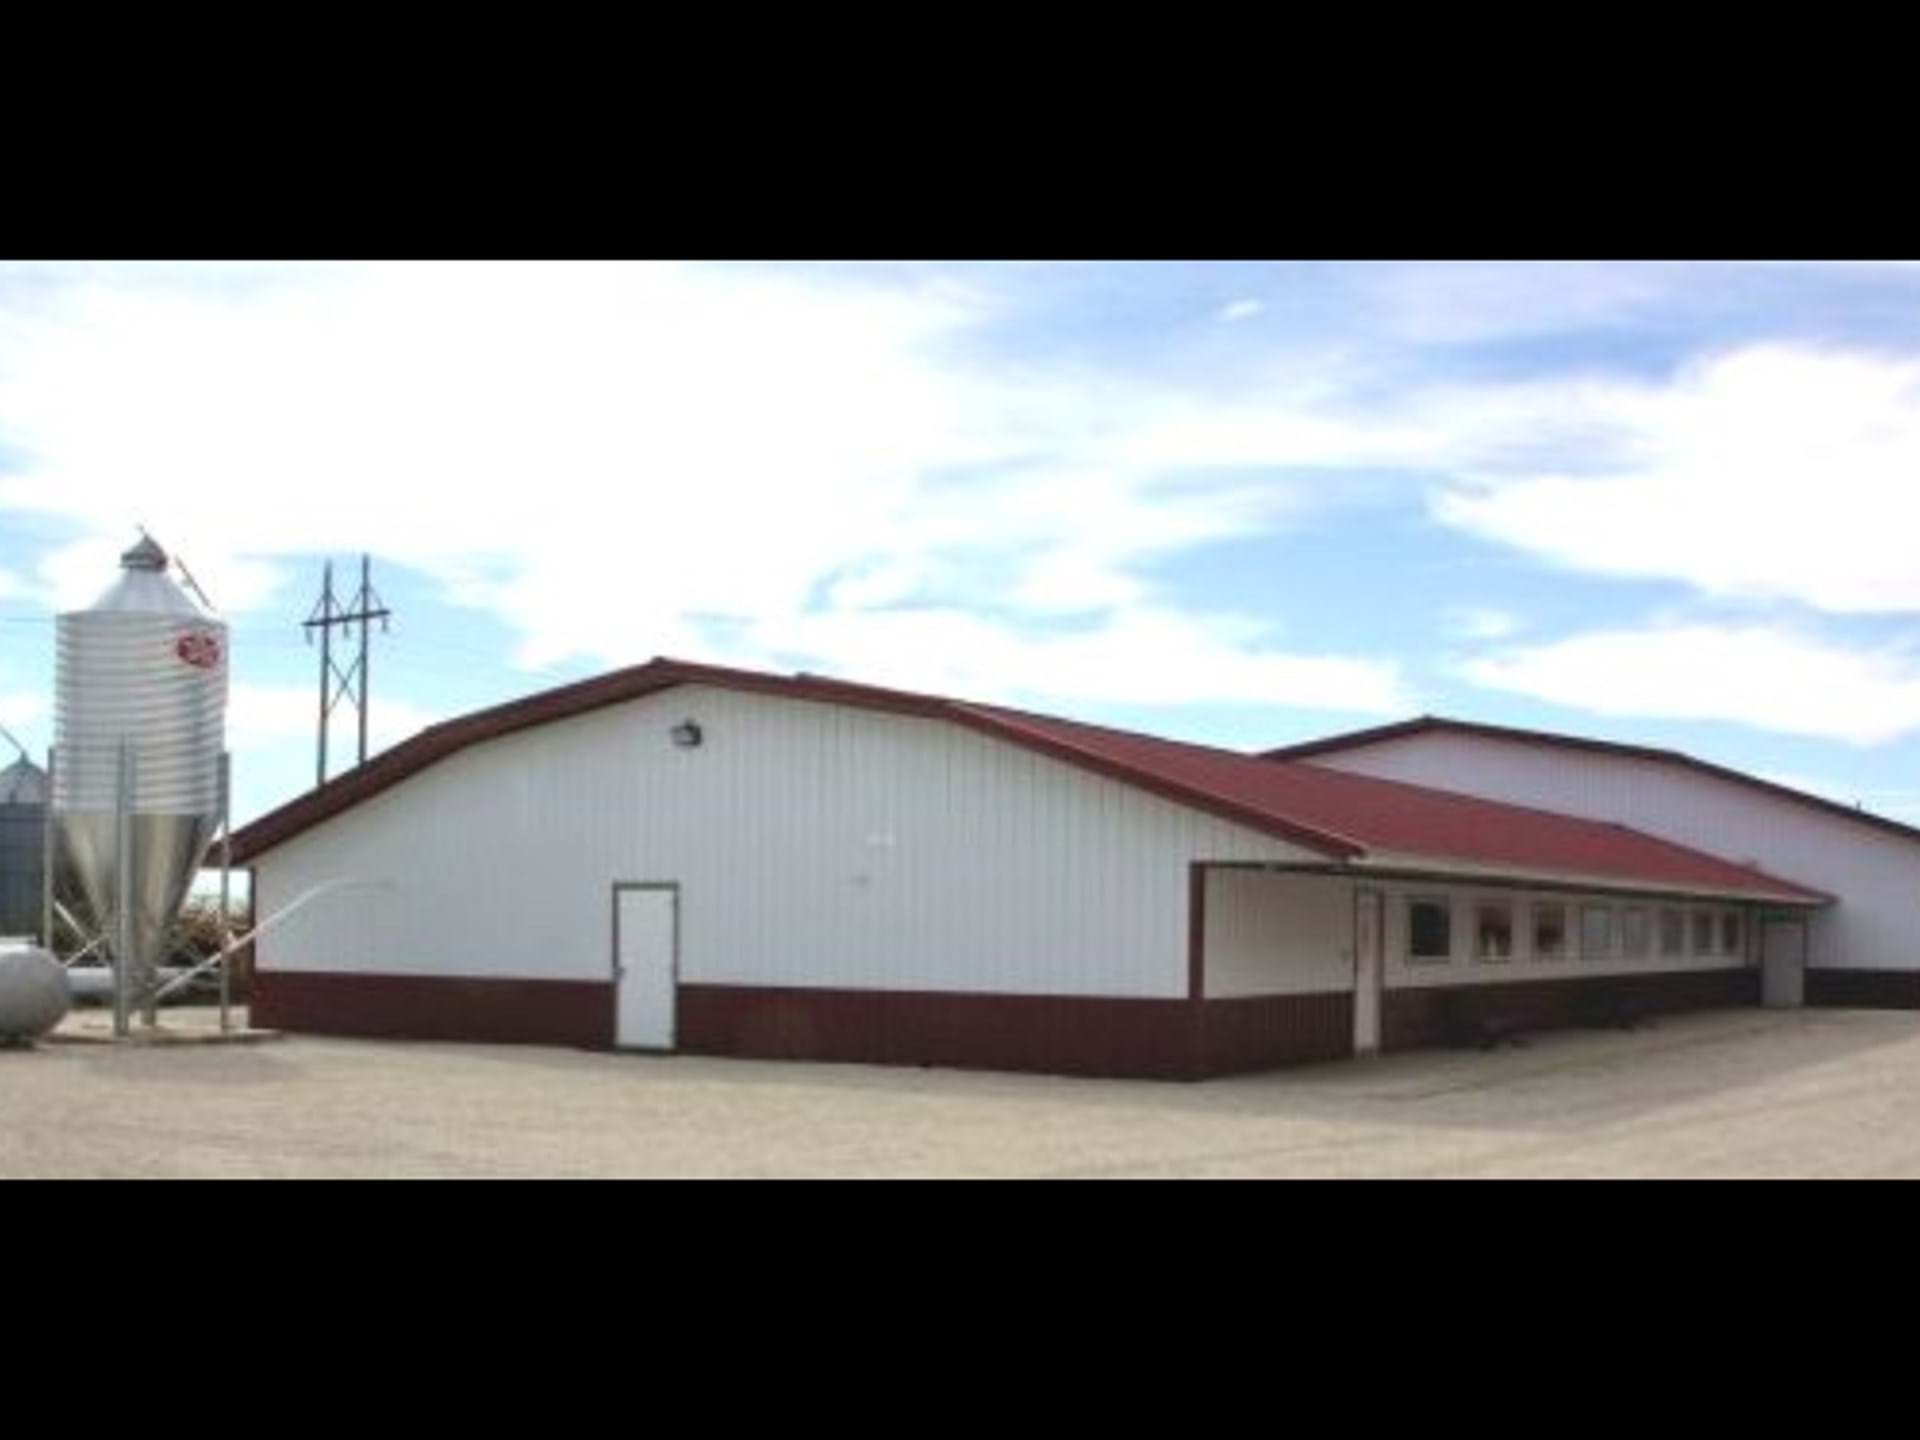 Come see the new Ag Center in Cresco!